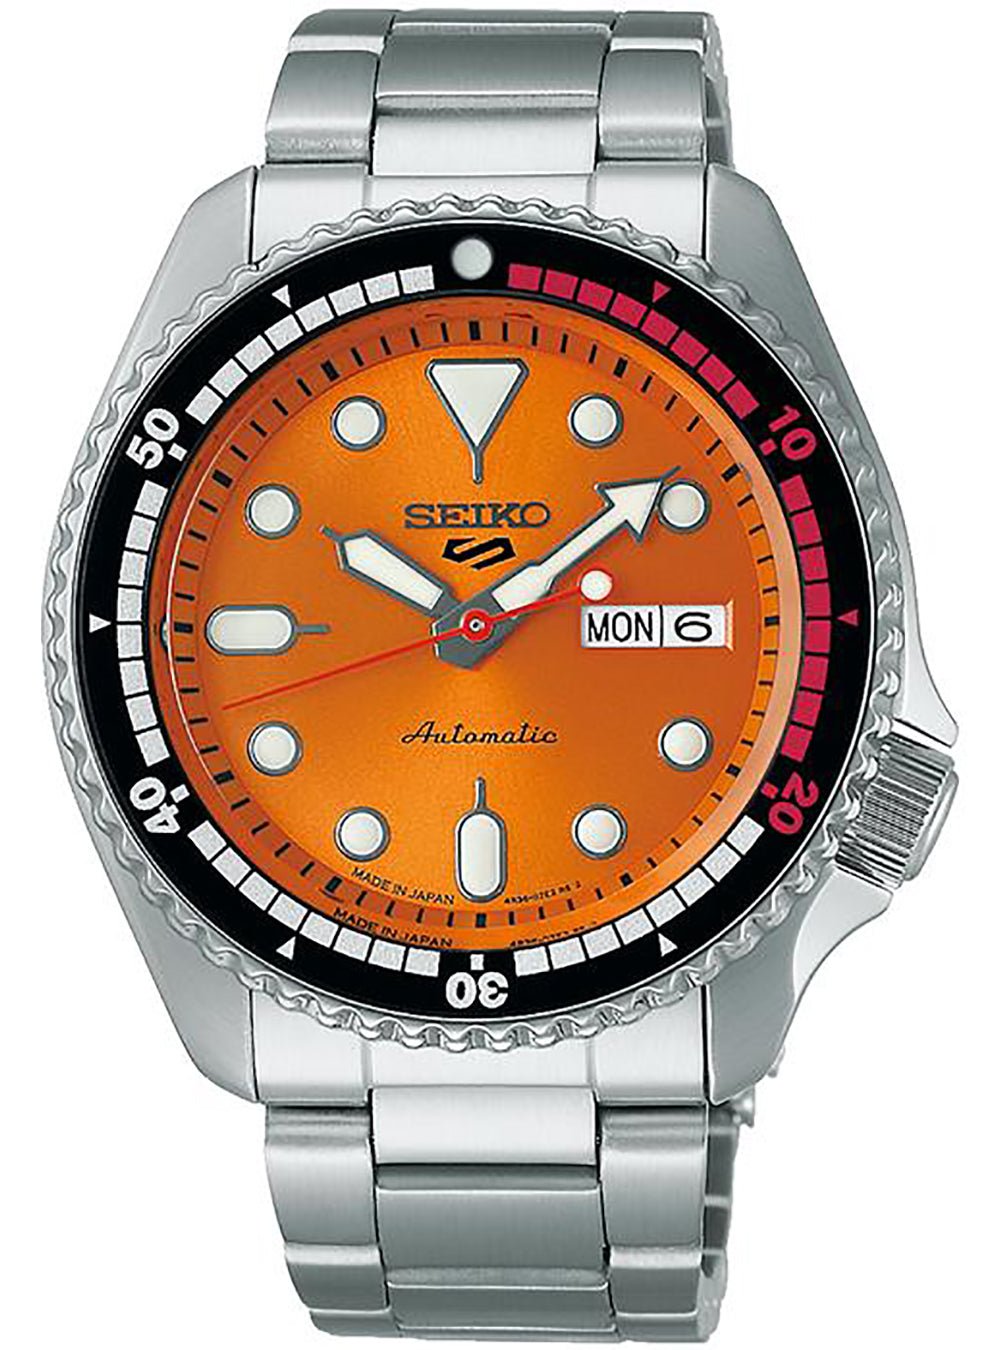 SEIKO 5 SPORTS SKX SPORTS STYLE 55TH ANNIVERSARY CUSTOMIZE CAMPAIGN LIMITED  EDITION SBSA215 MADE IN JAPAN JDM